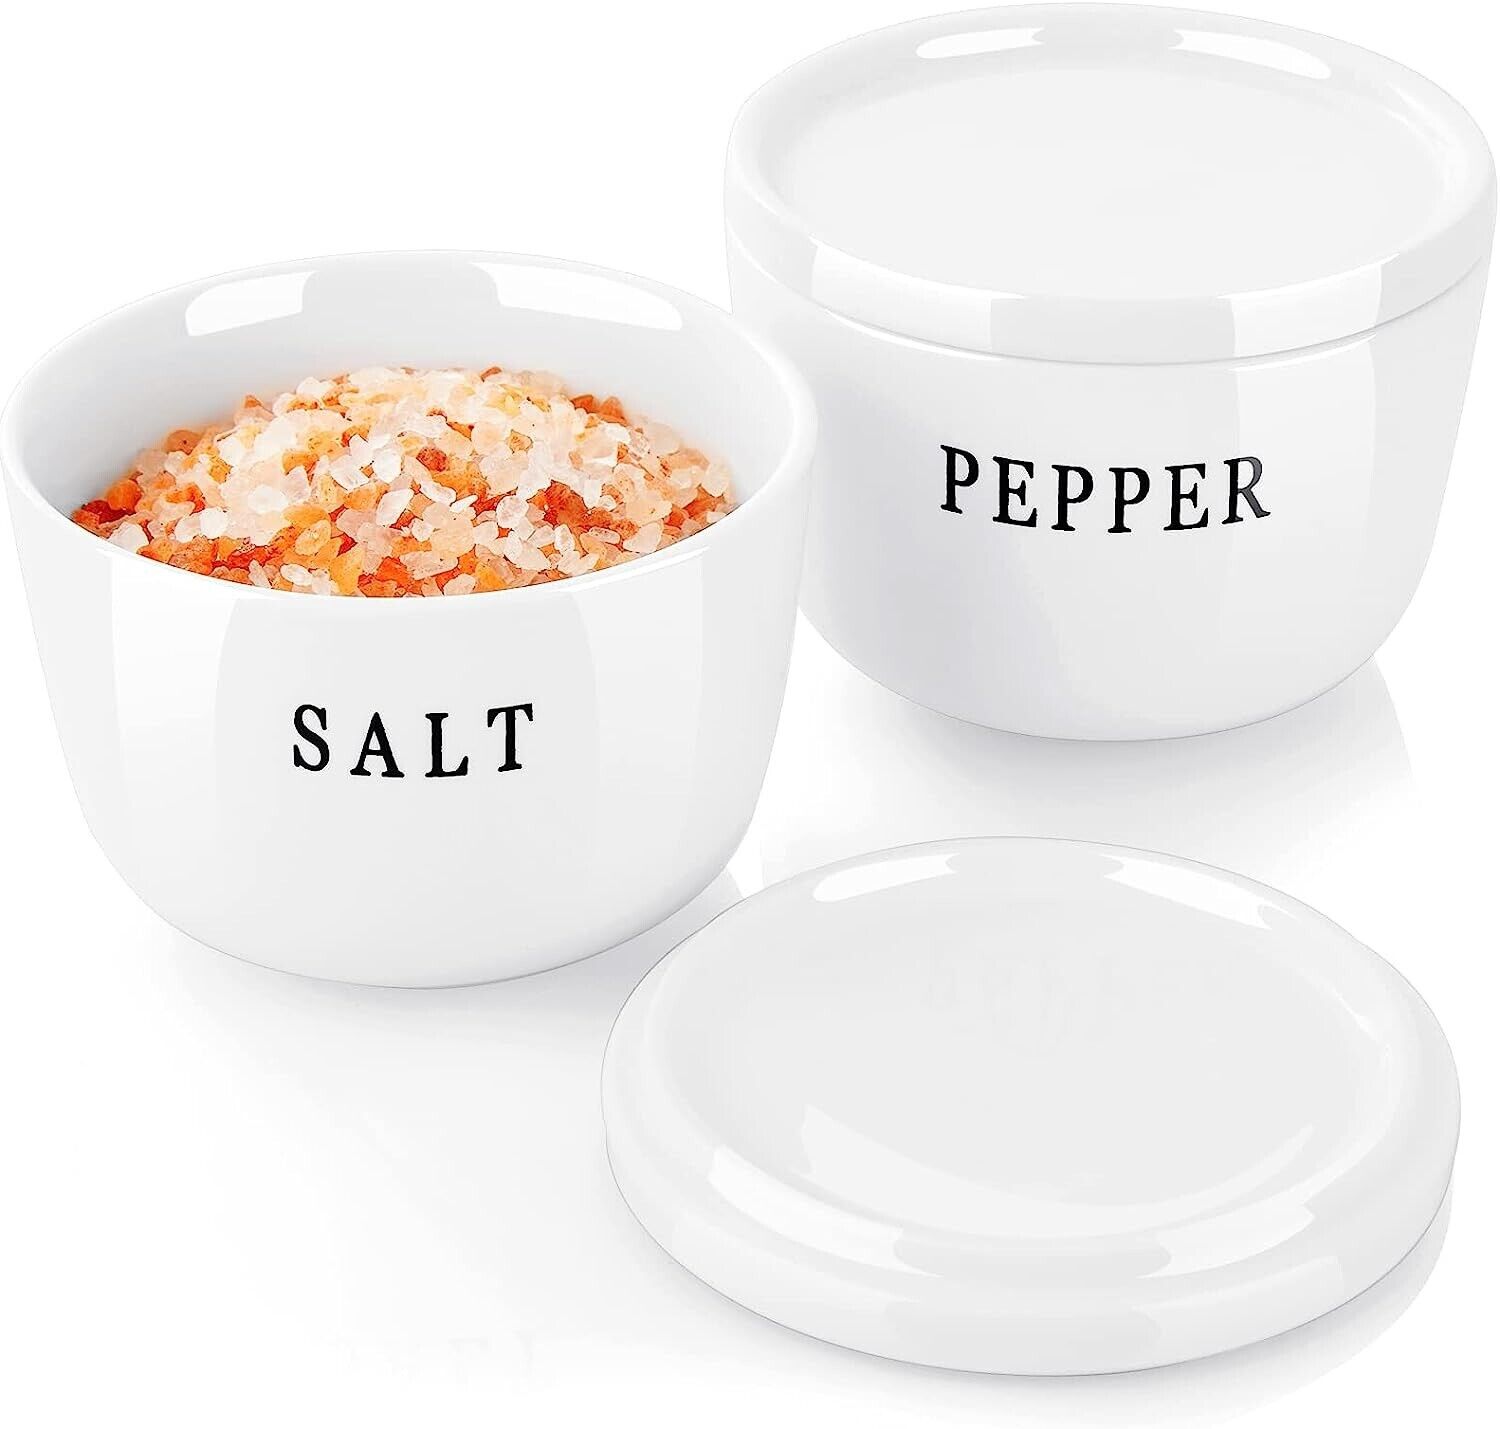 Set of 2 Ceramic Salt and Pepper 10 oz Bowls Container Set with Lids, White